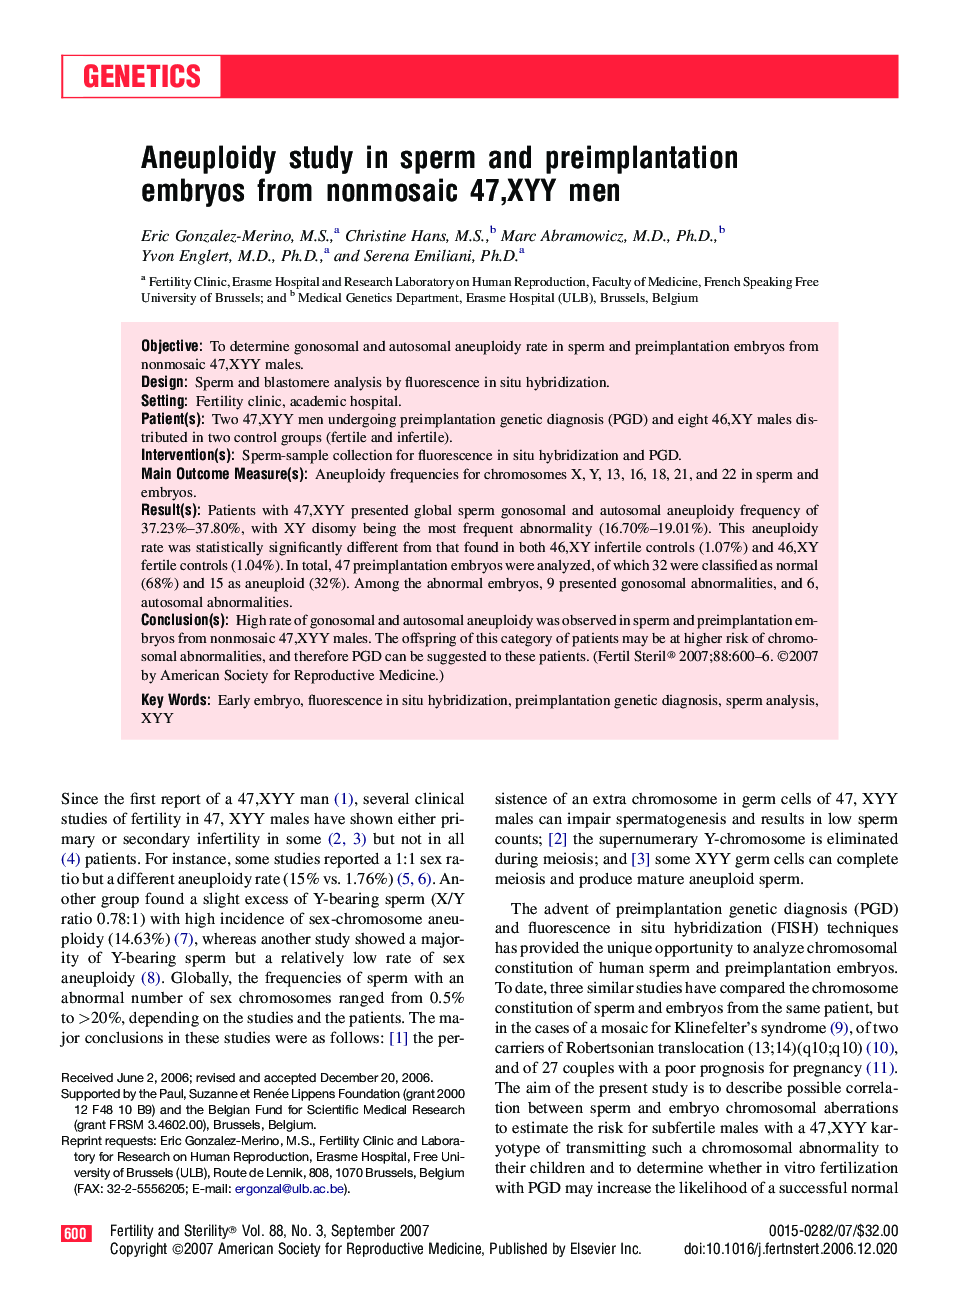 Aneuploidy study in sperm and preimplantation embryos from nonmosaic 47,XYY men 